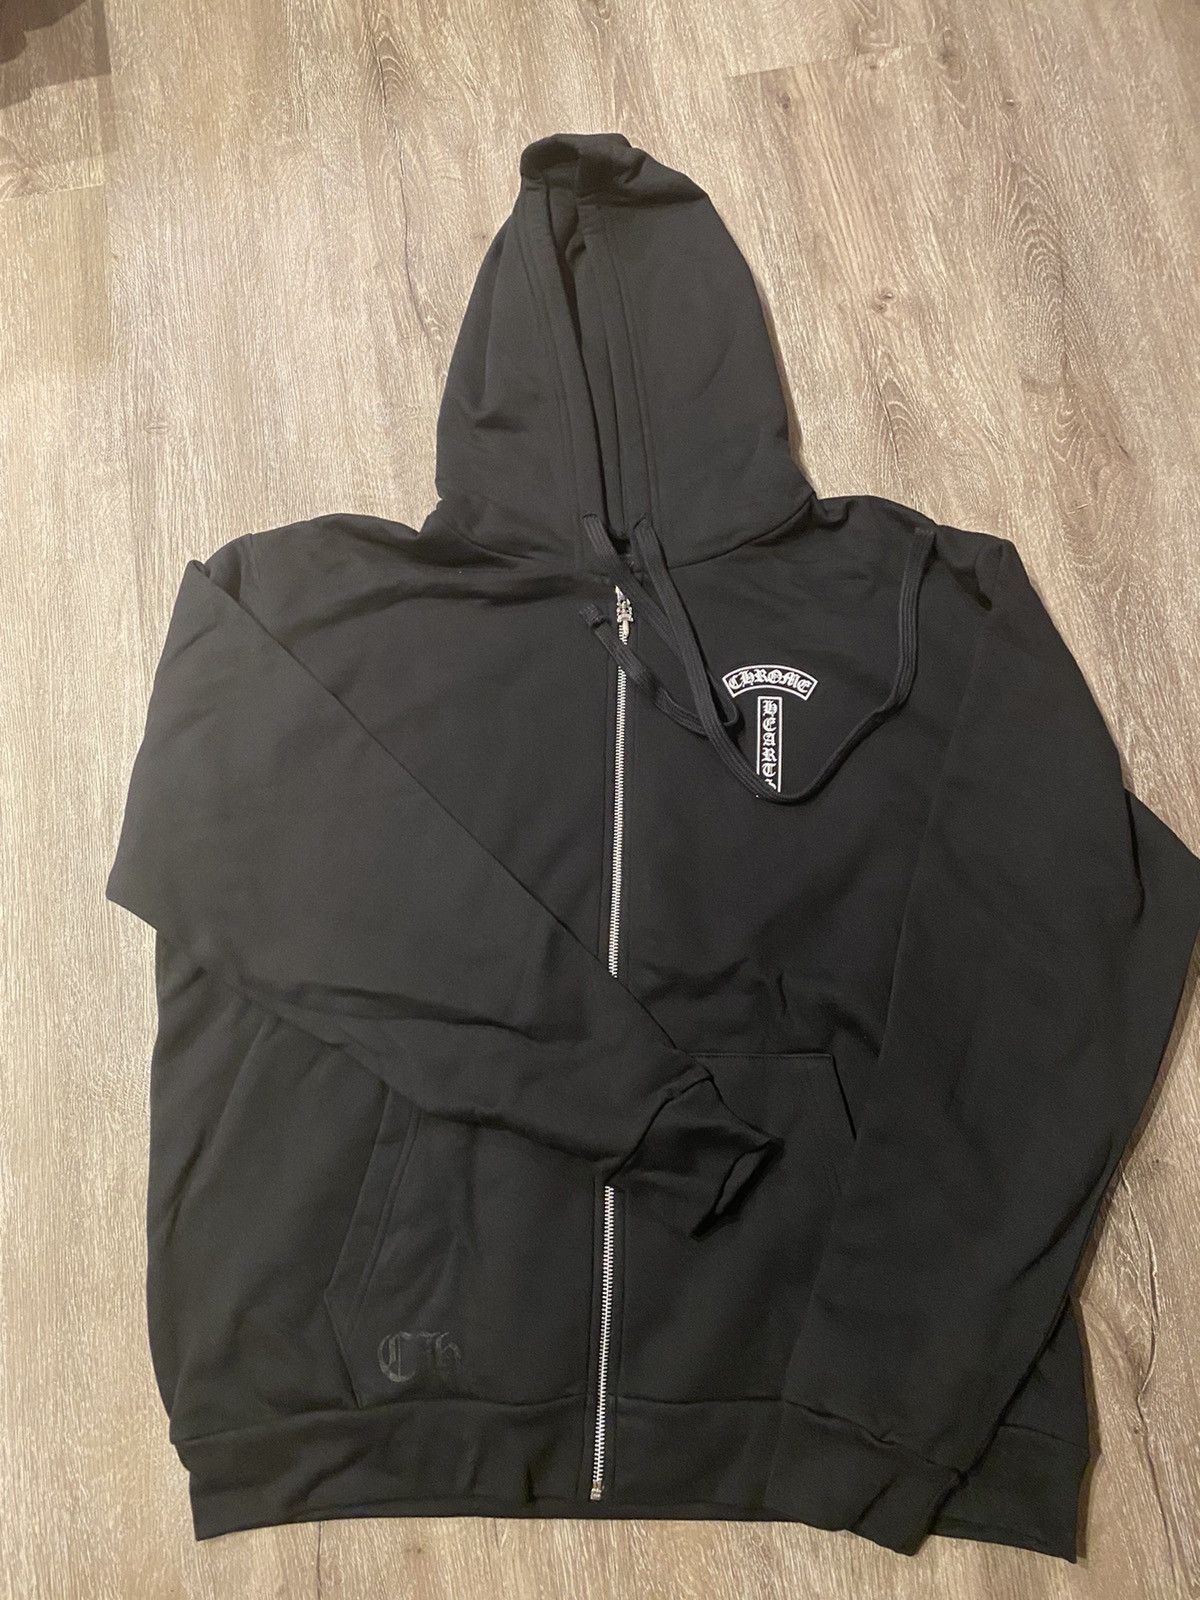 Pick up from CH Paris store. Saw the monogram zip hoodie and couldn't pass  on it. Was the last piece. : r/ChromeHeart